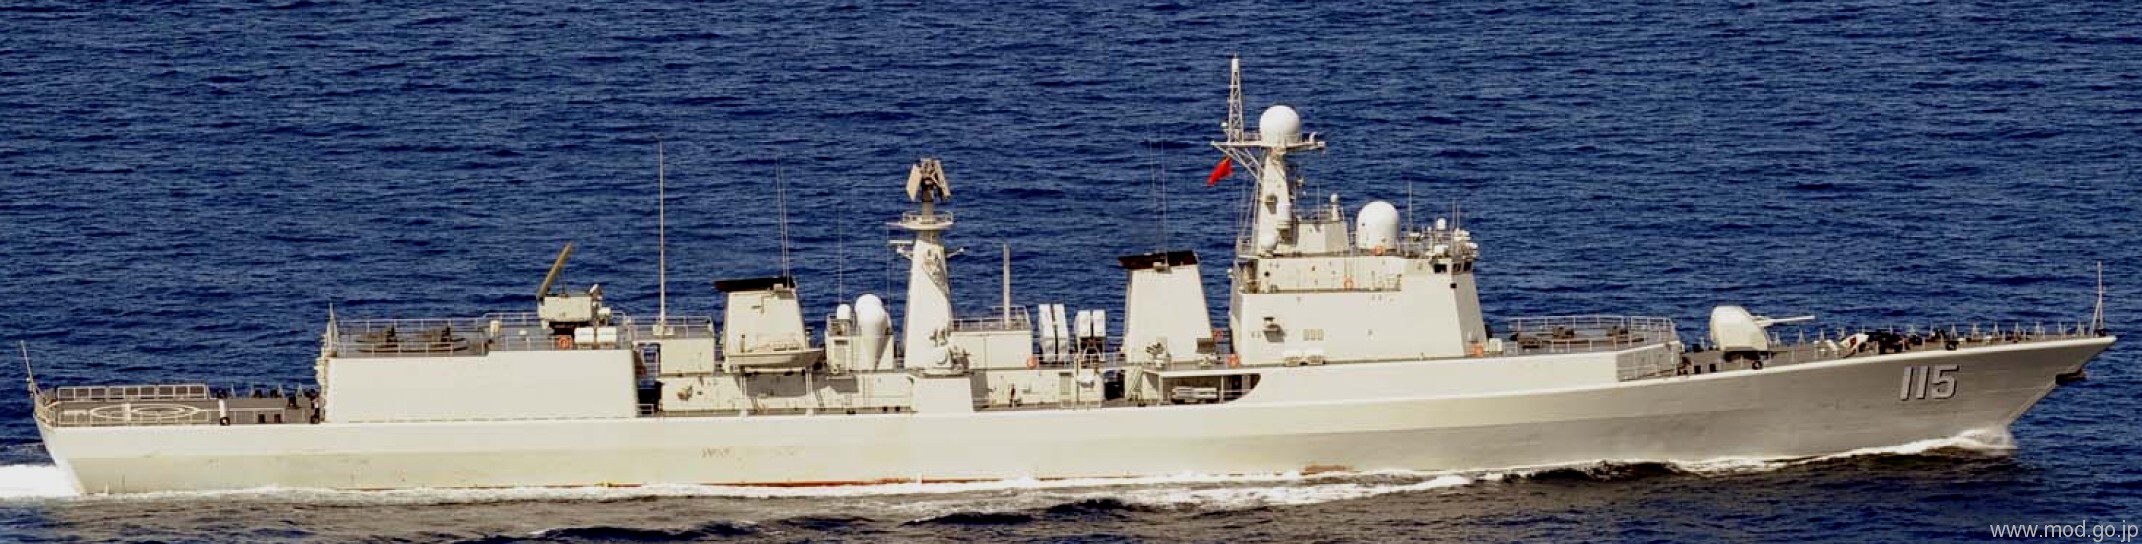 type 051c luzhou class guided missile destroyer people's liberation army navy china plans ddg-115 shenyang 03